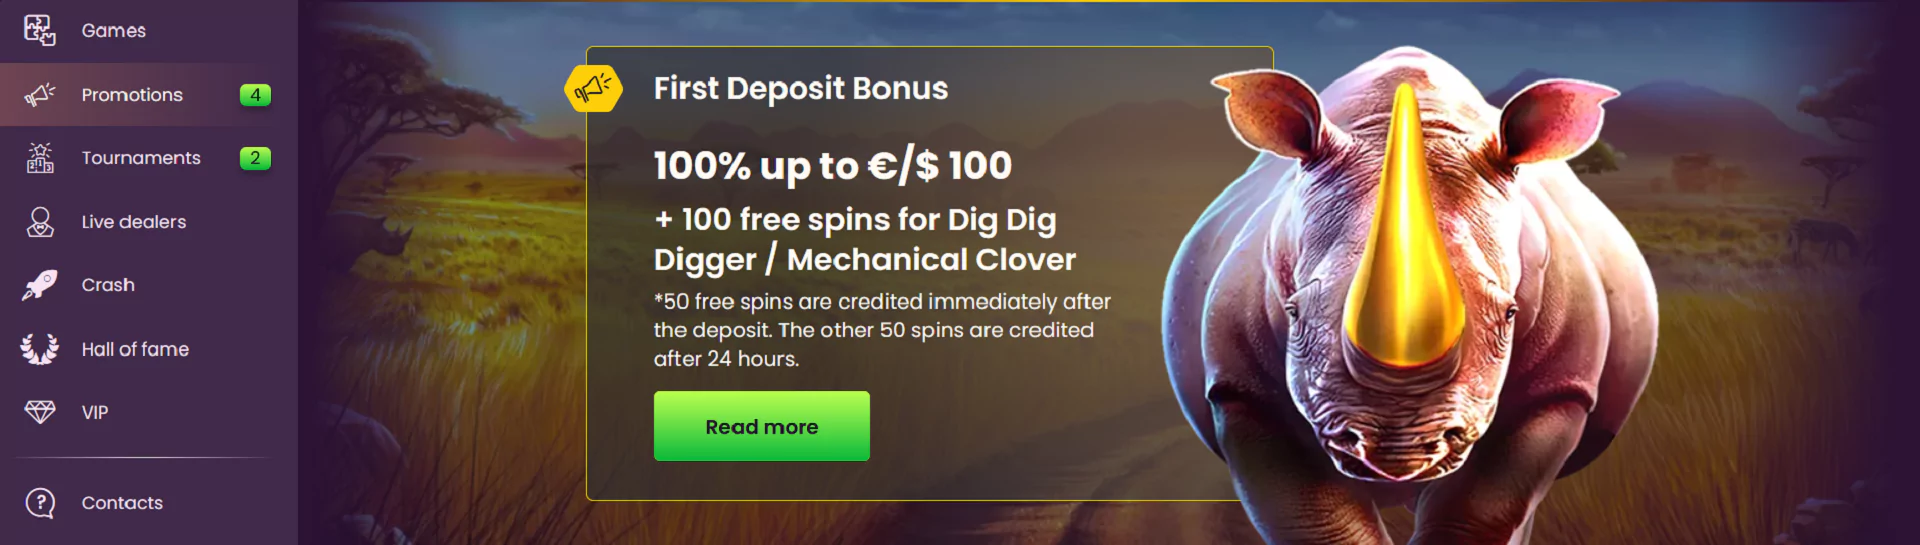 Screenshot of available promotions and bonuses from the Bizzo Casino website